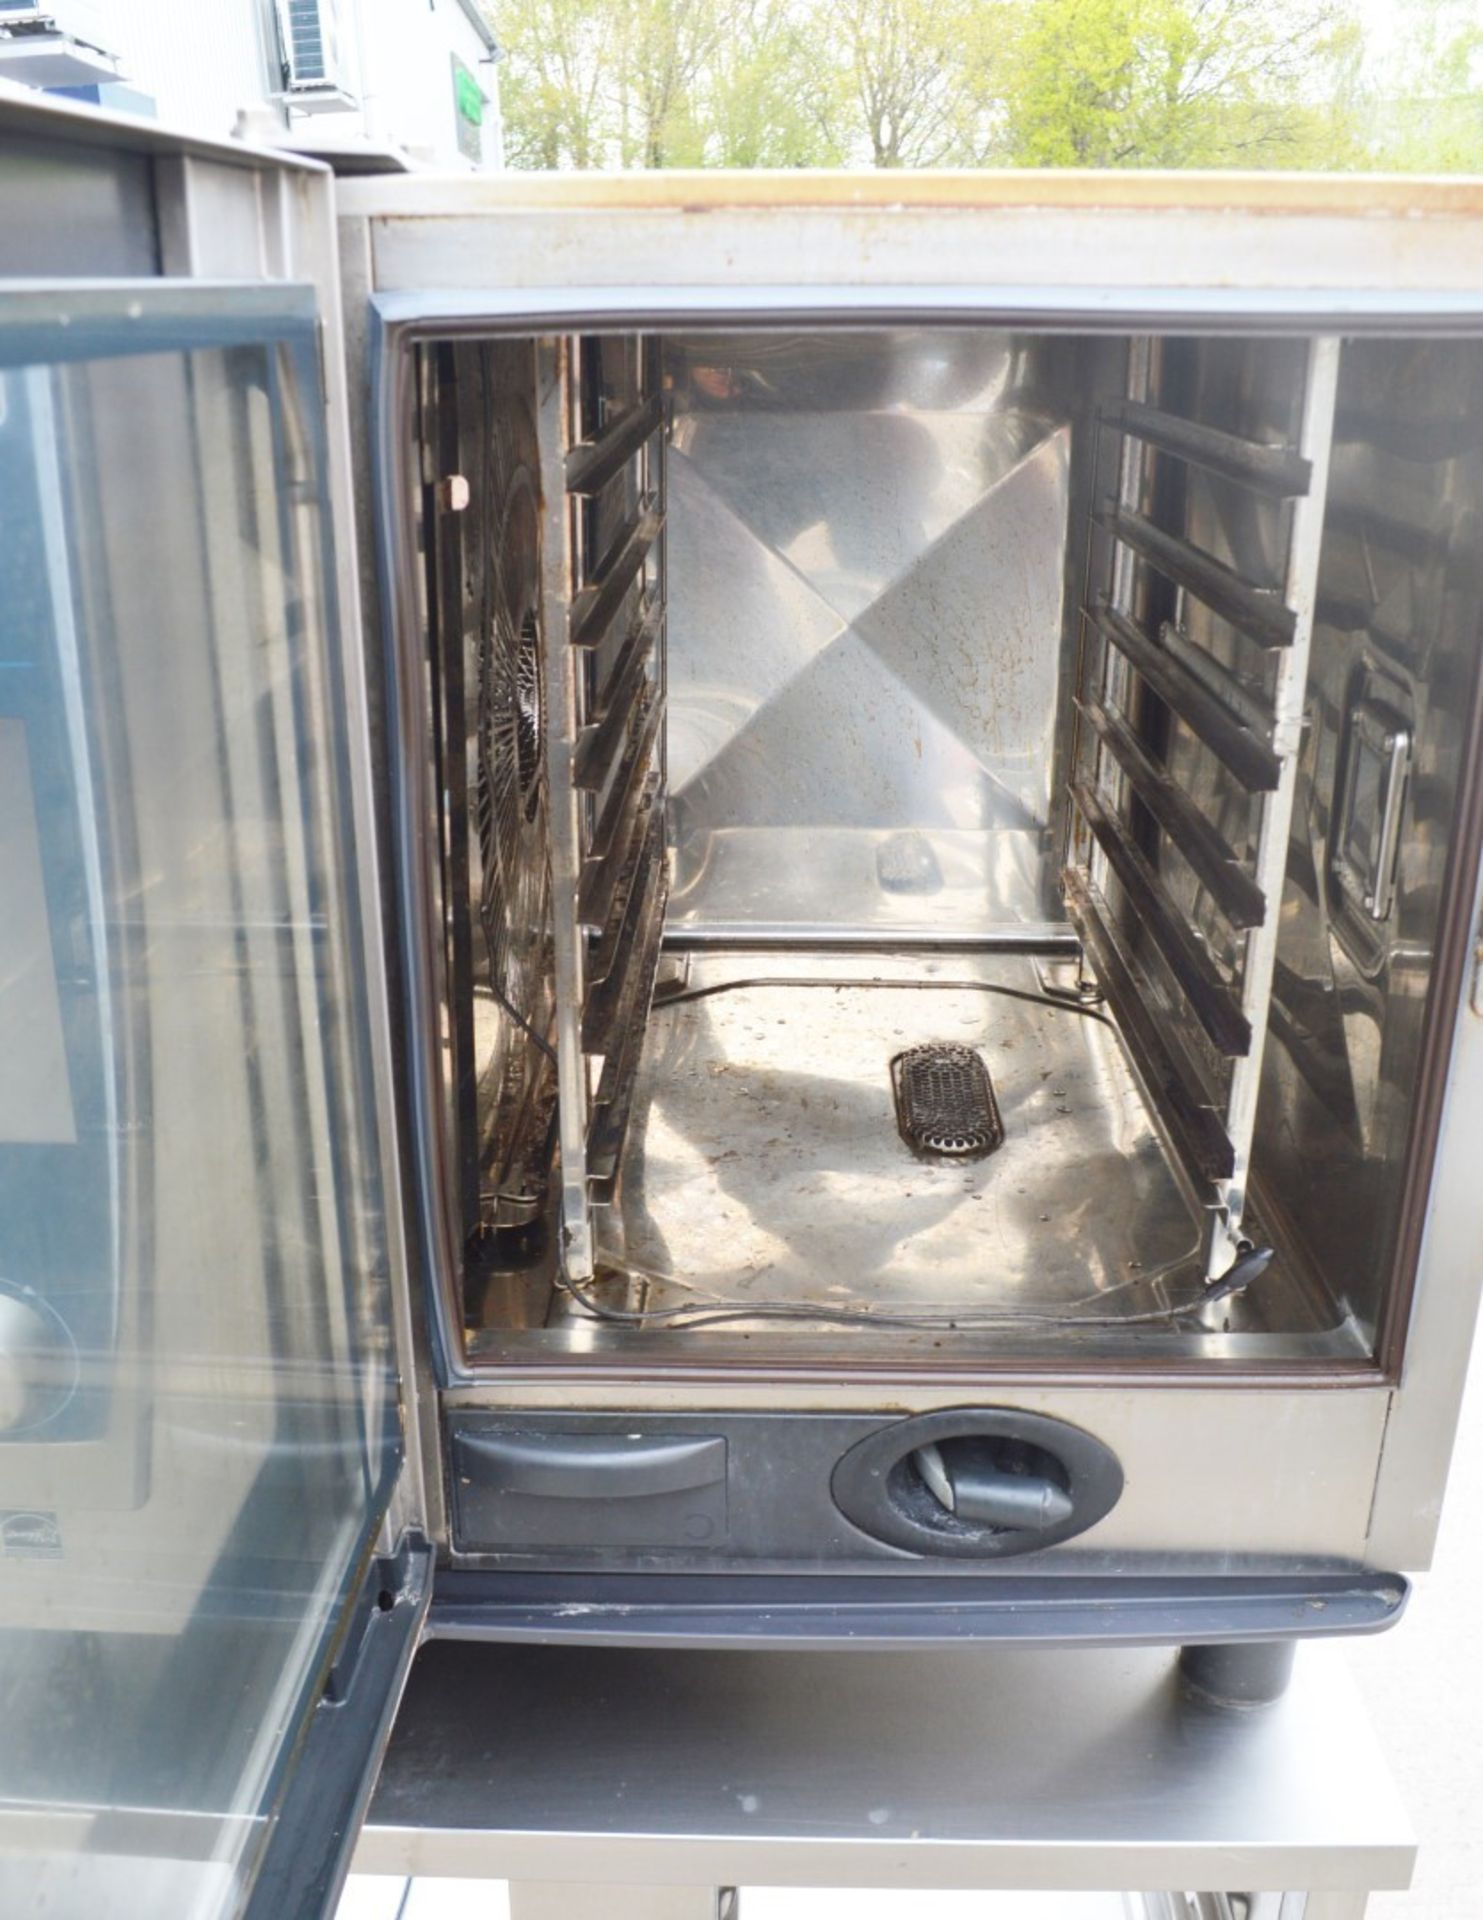 1 x Rational SCC WE 61G Combi Oven - Dimensions: H146 x W84 x D79 cms - Ref 664 WH2 - CL653 - - Image 5 of 12